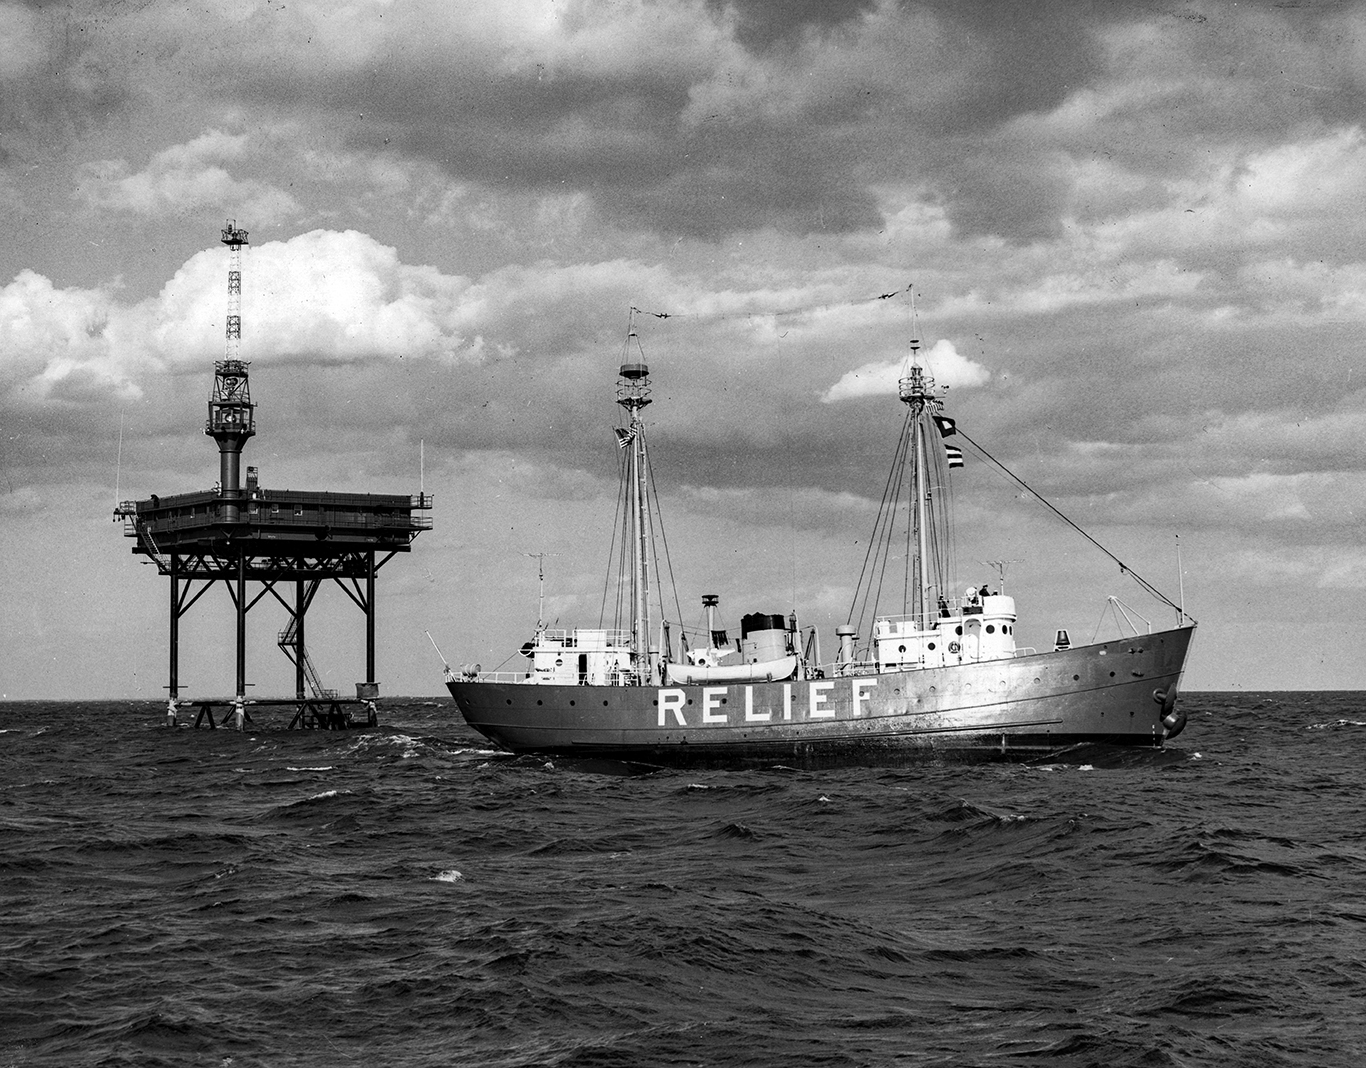 Lightship Relief (WAL-532) leaving the Buzzards Bay station on November 1, 1961